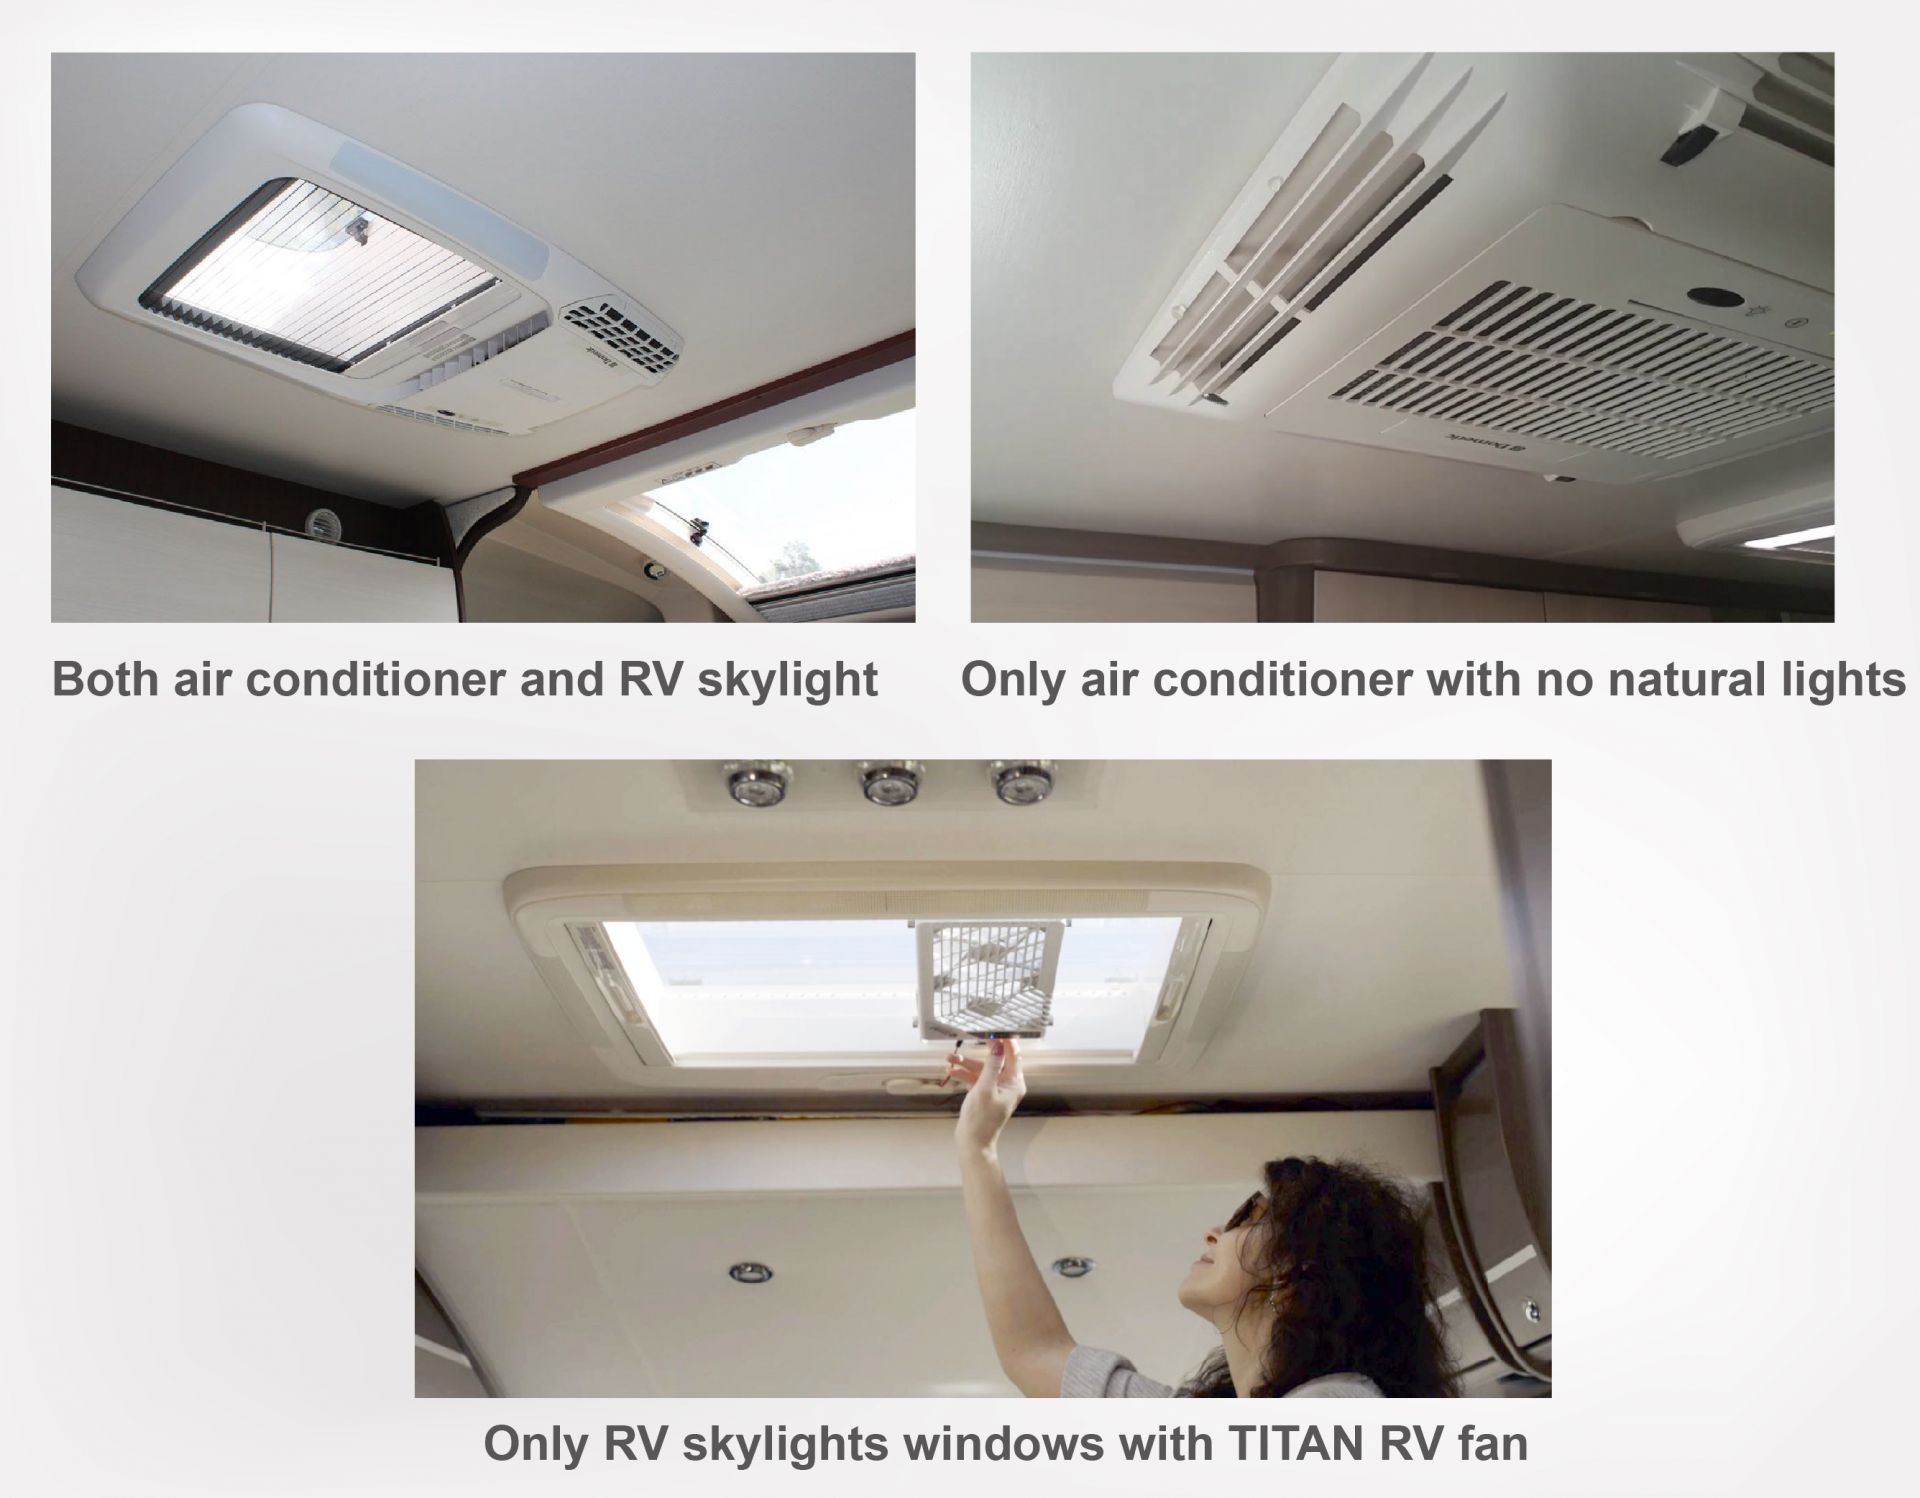 The problem of RV skylights or RV roof window